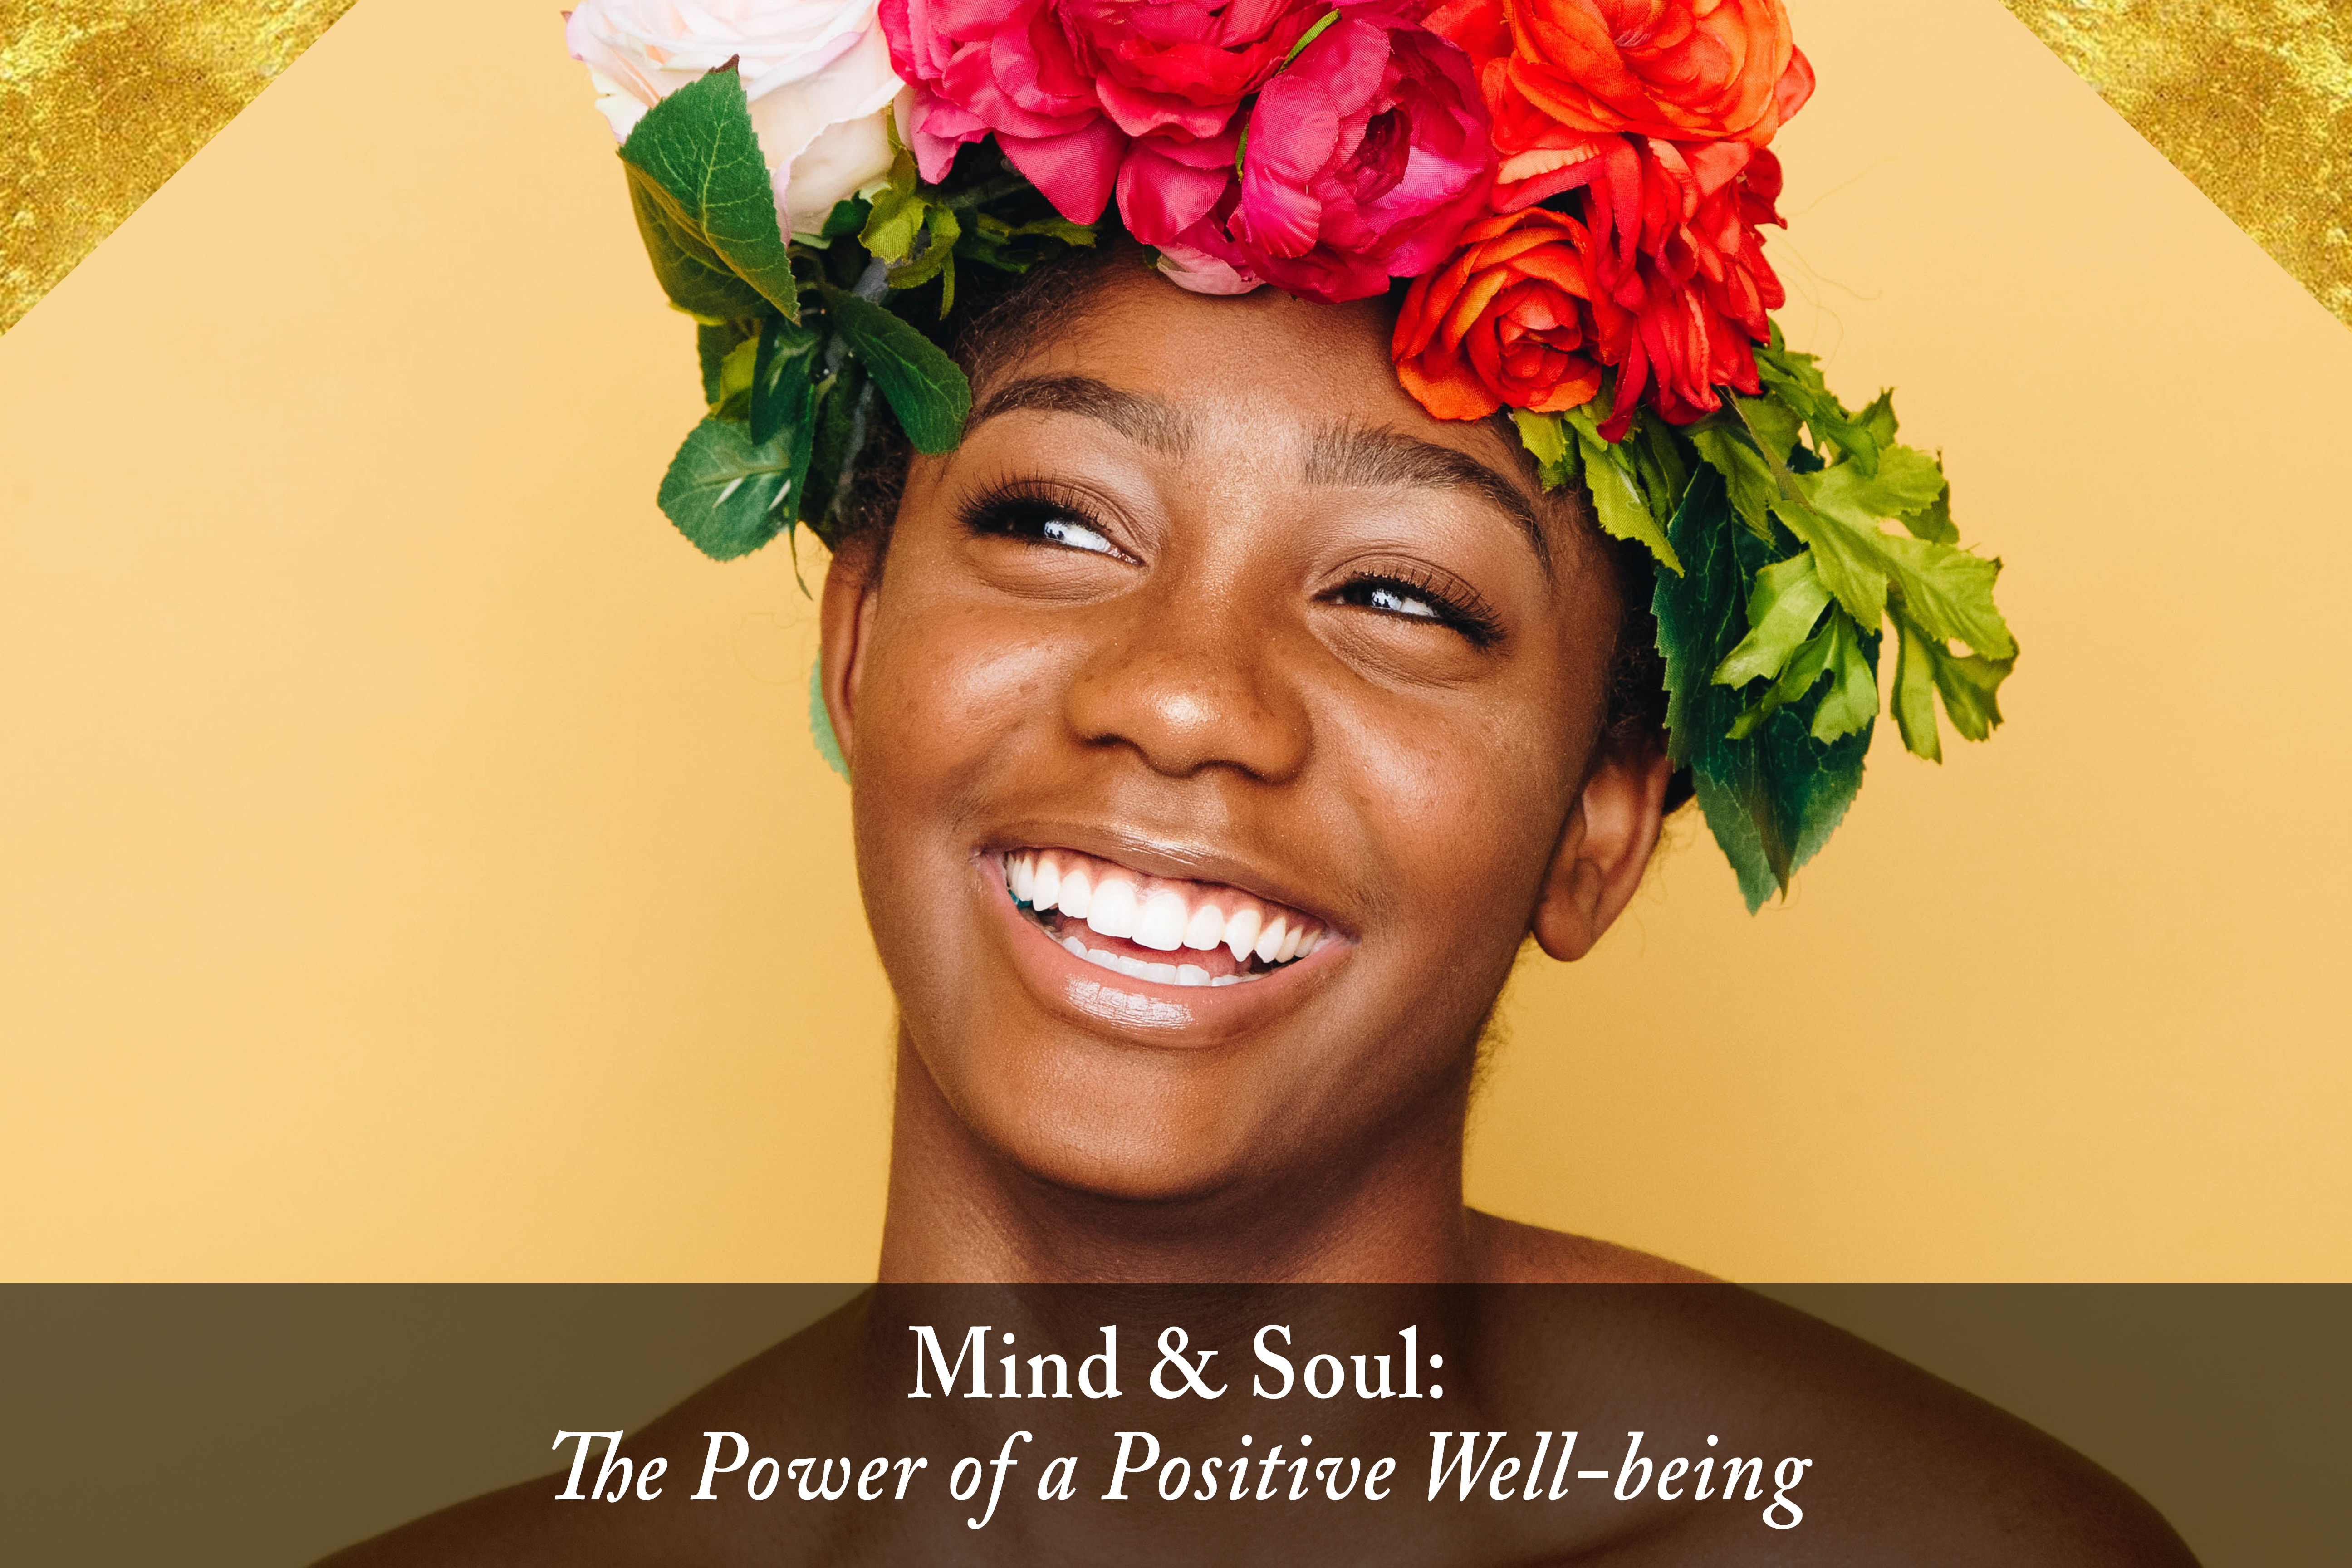 Mind&Soul, The Power of A Positive Well-Being - HI 3